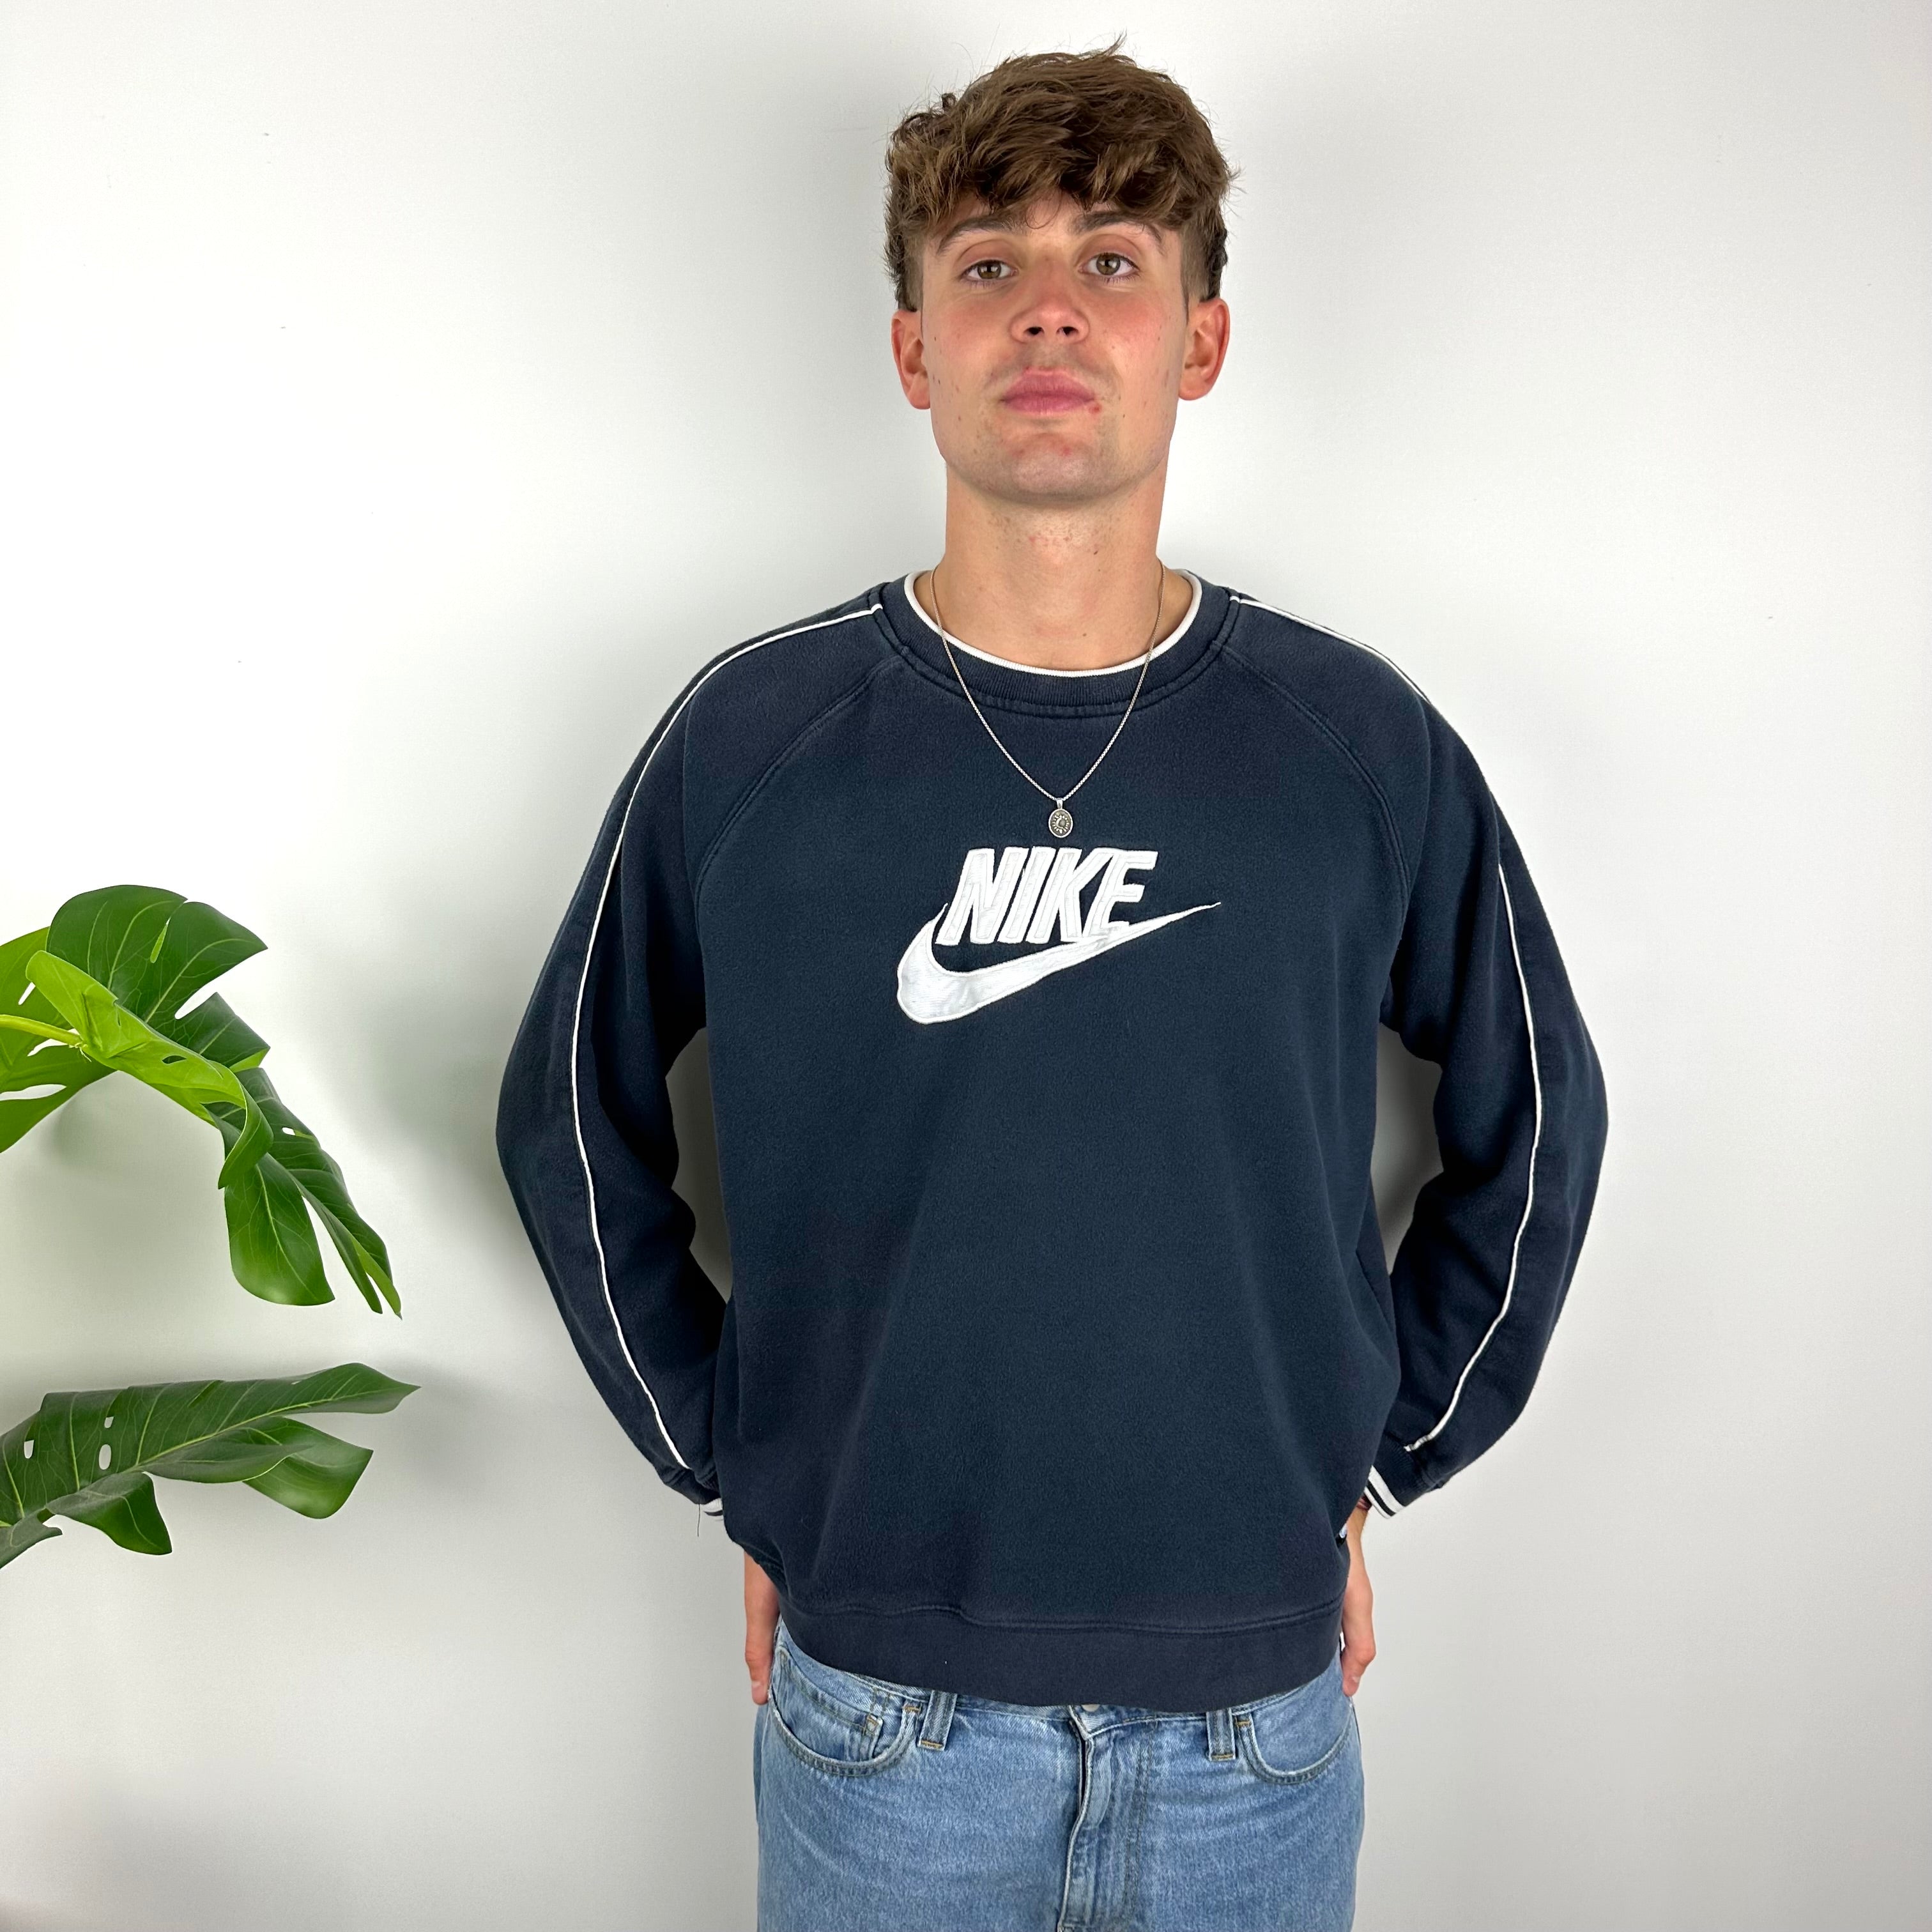 Nike RARE Navy Embroidered Spell Out Sweatshirt (L)